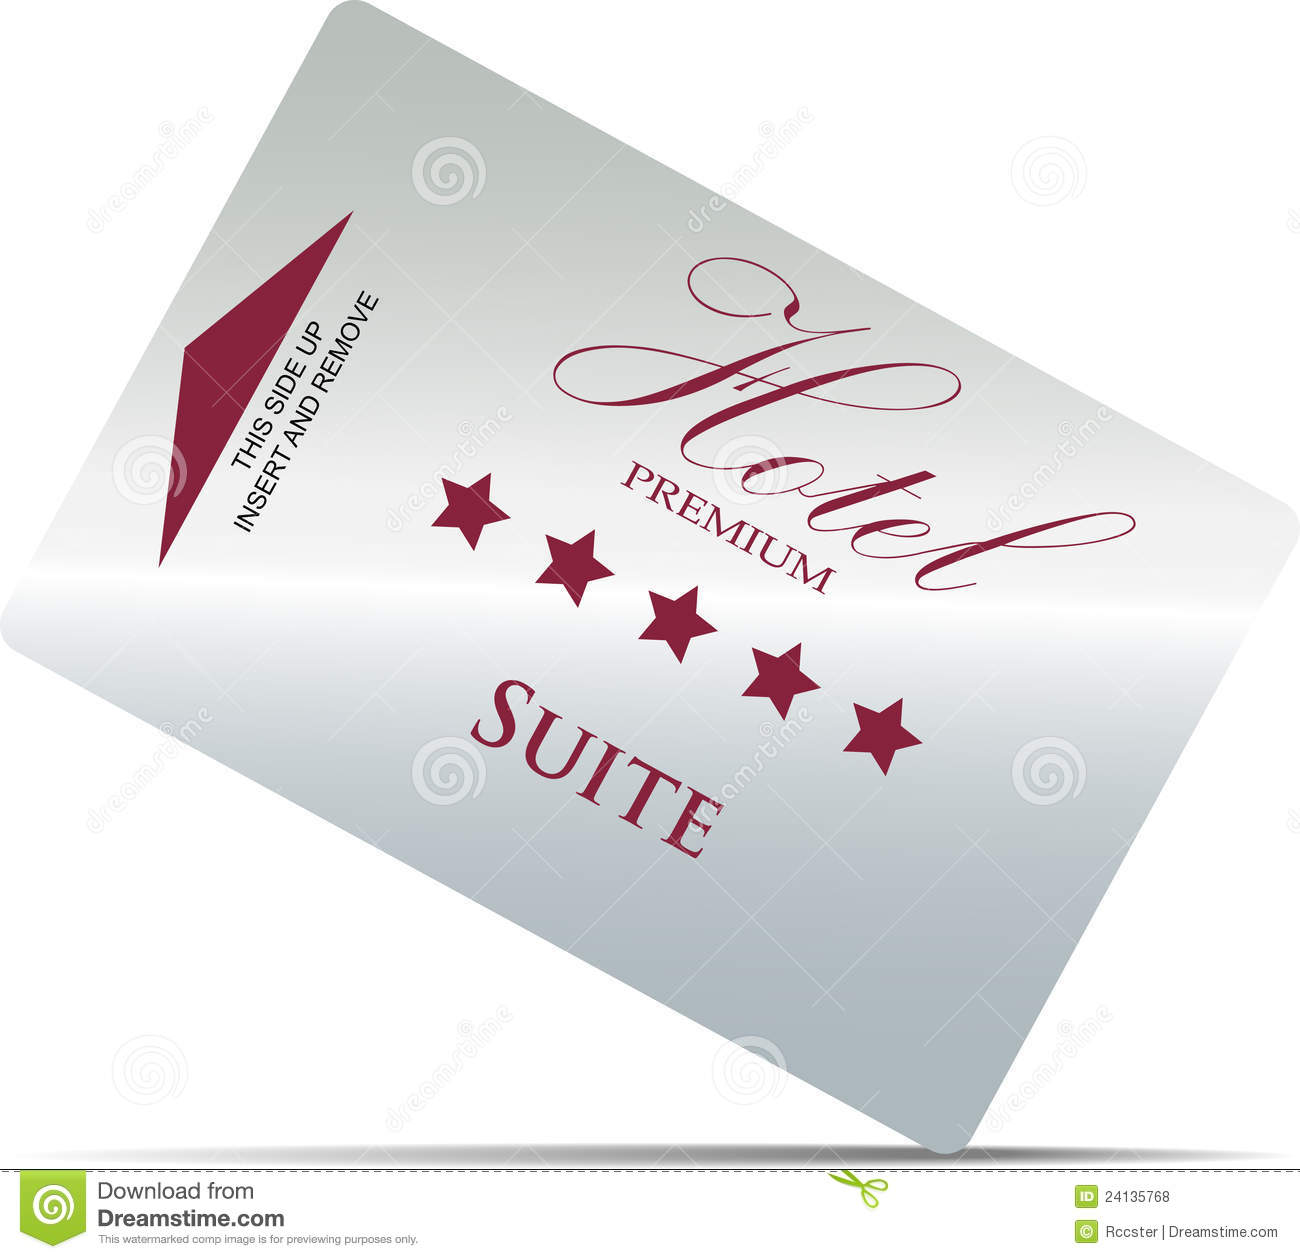     Clipart Hotel Front Desk Clipart Hotel Building Clipart Hotel Room